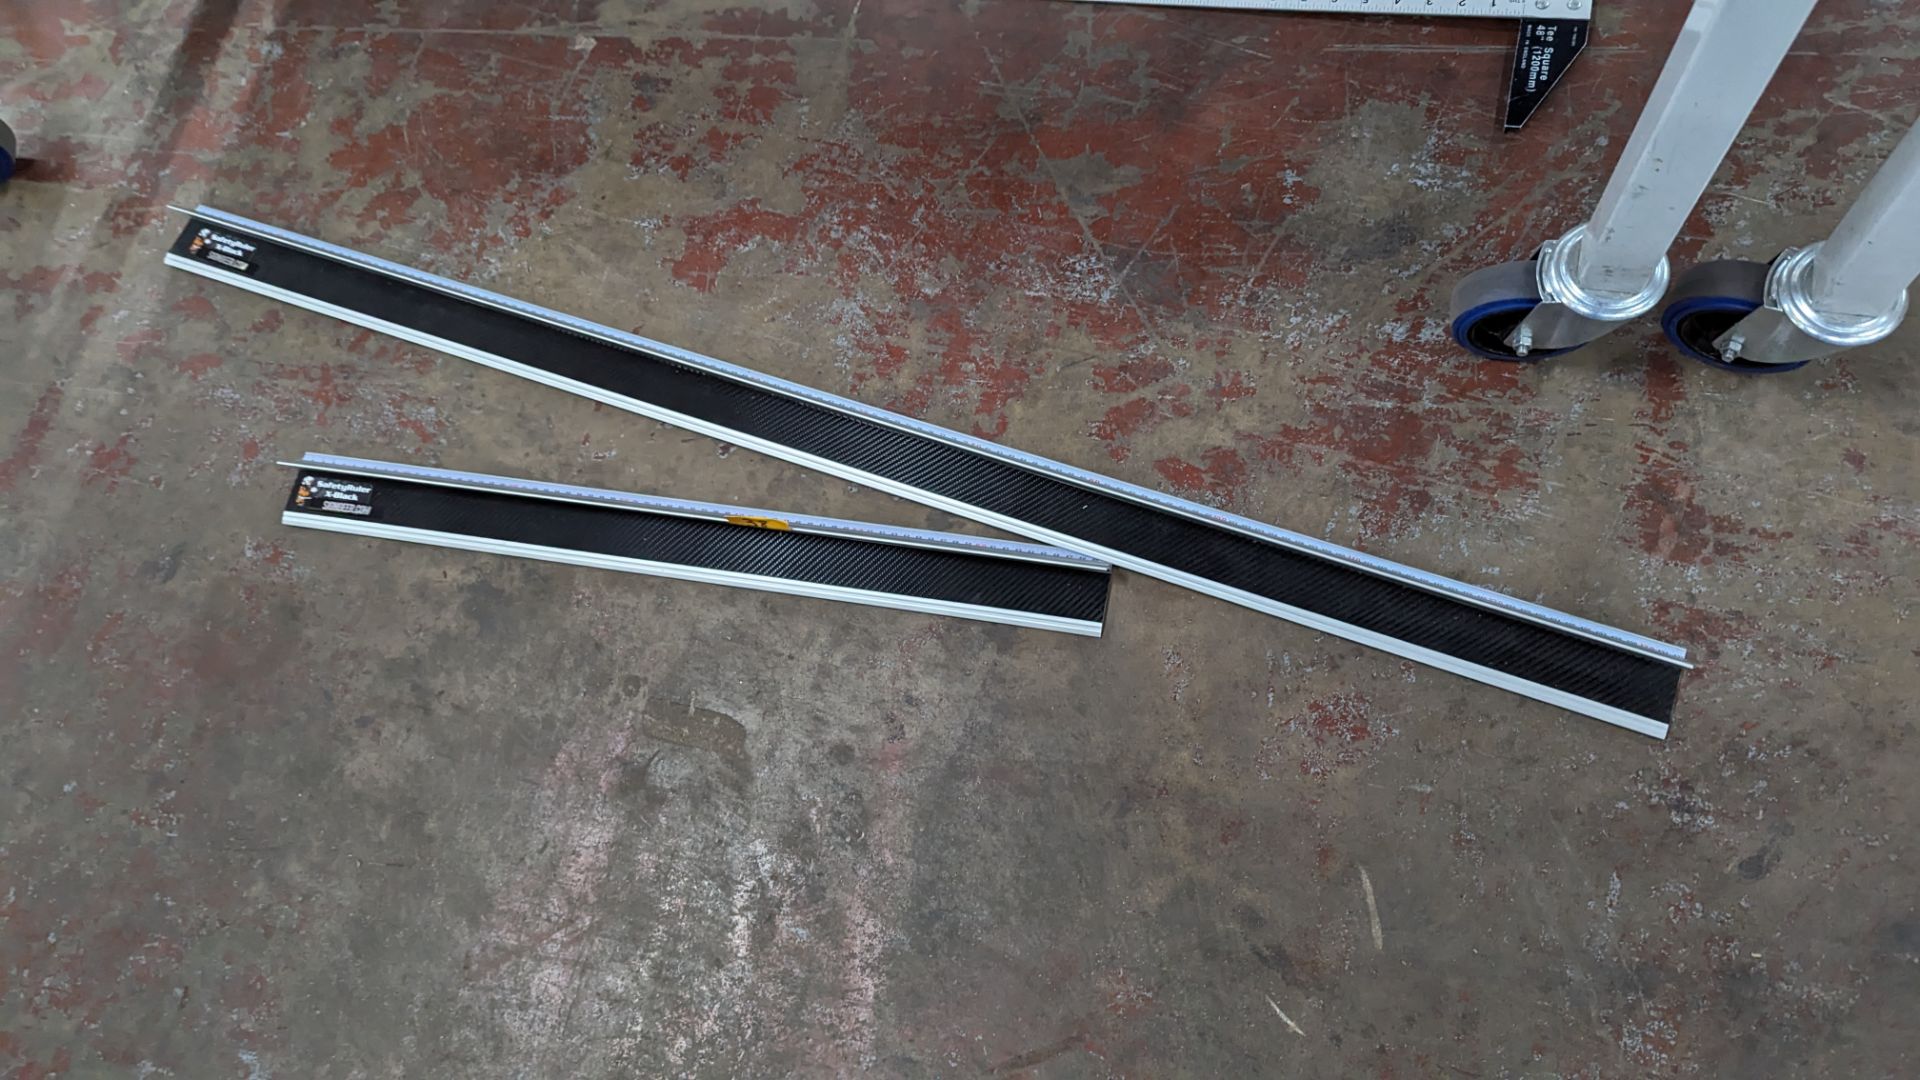 2 off Signgeer safety rulers, one being 70cm long and the other being 132cm long - Image 6 of 6